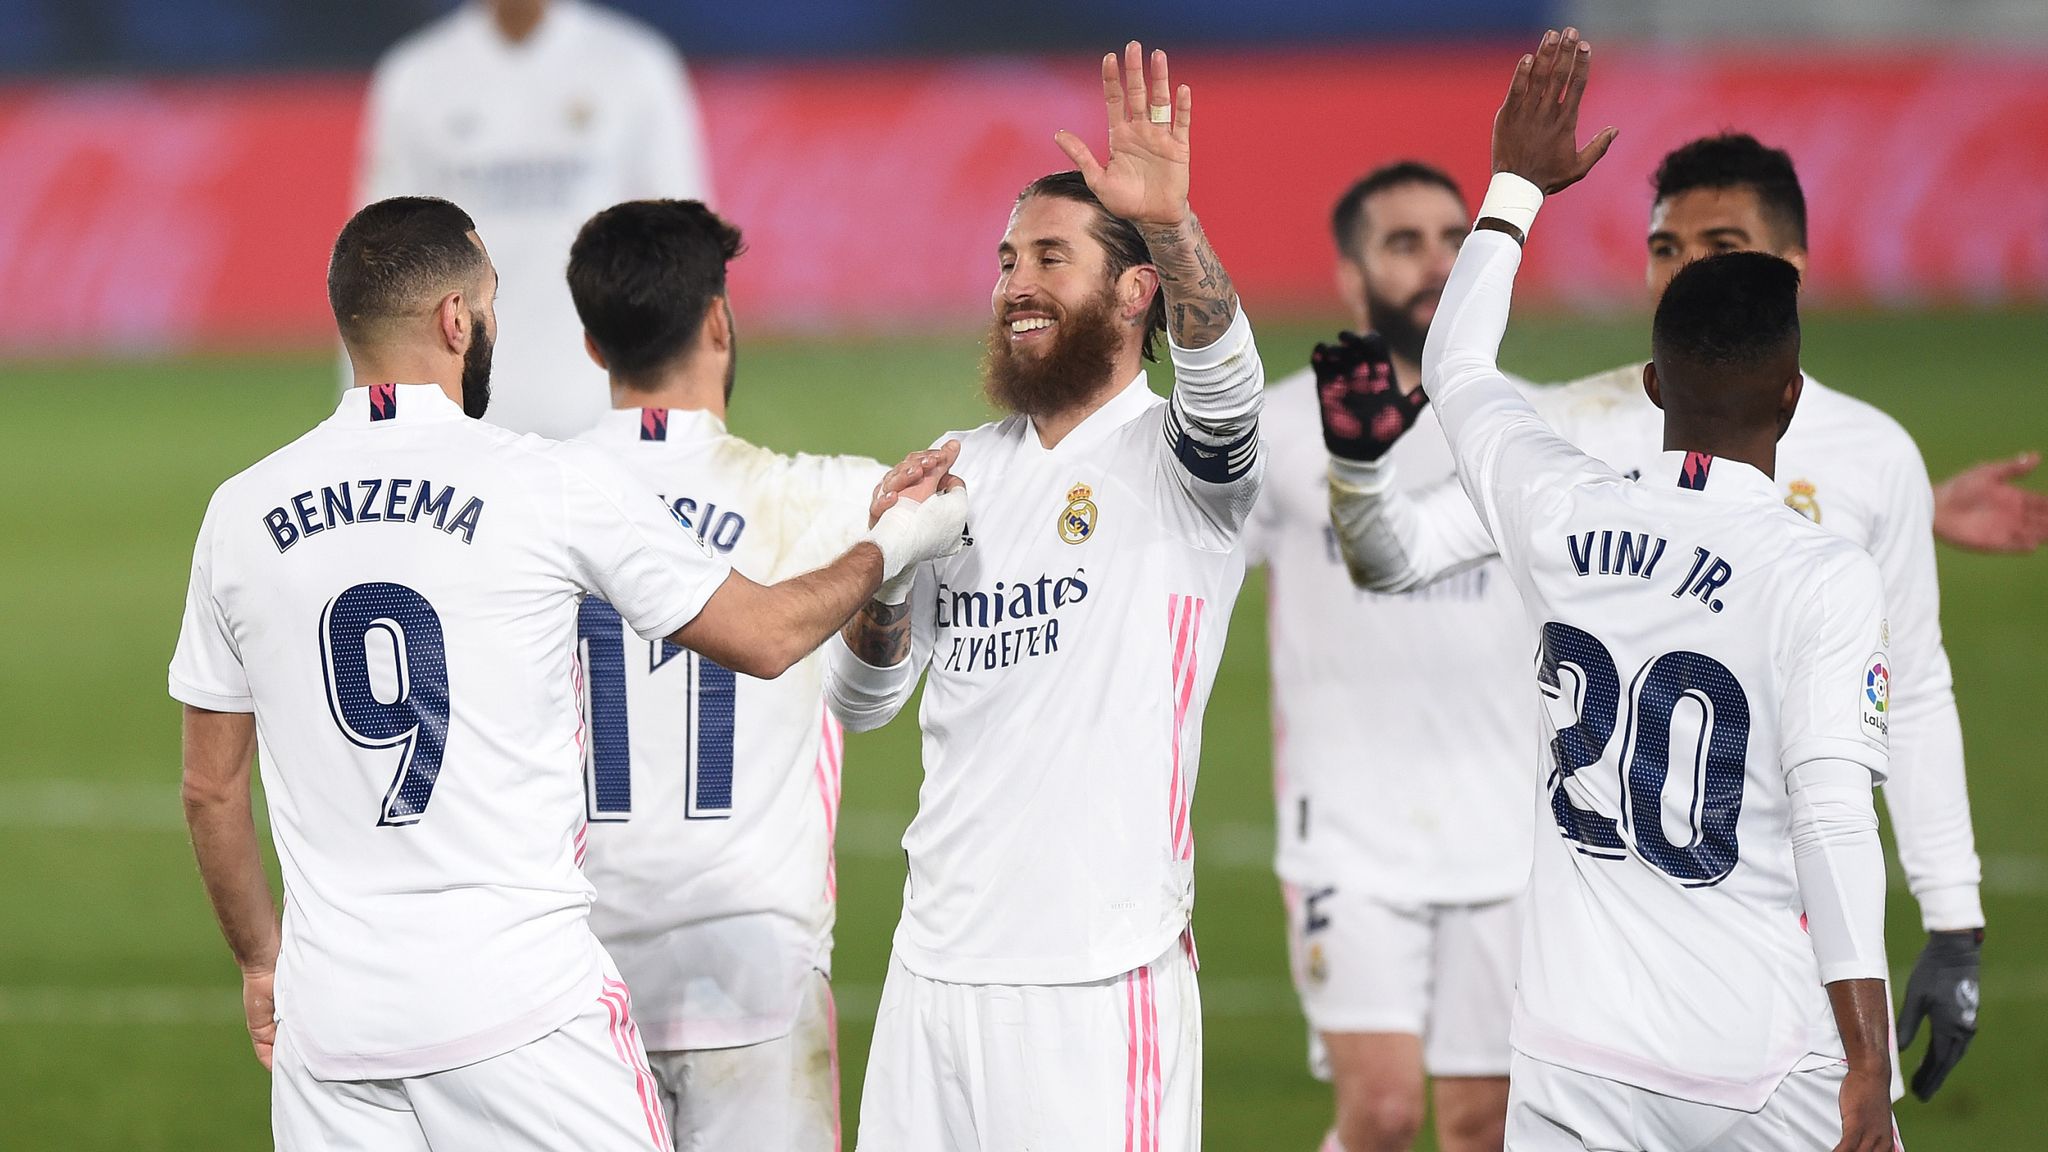 European round-up: Real Madrid beat Granada to move level with Atletico Madrid at top of La Liga